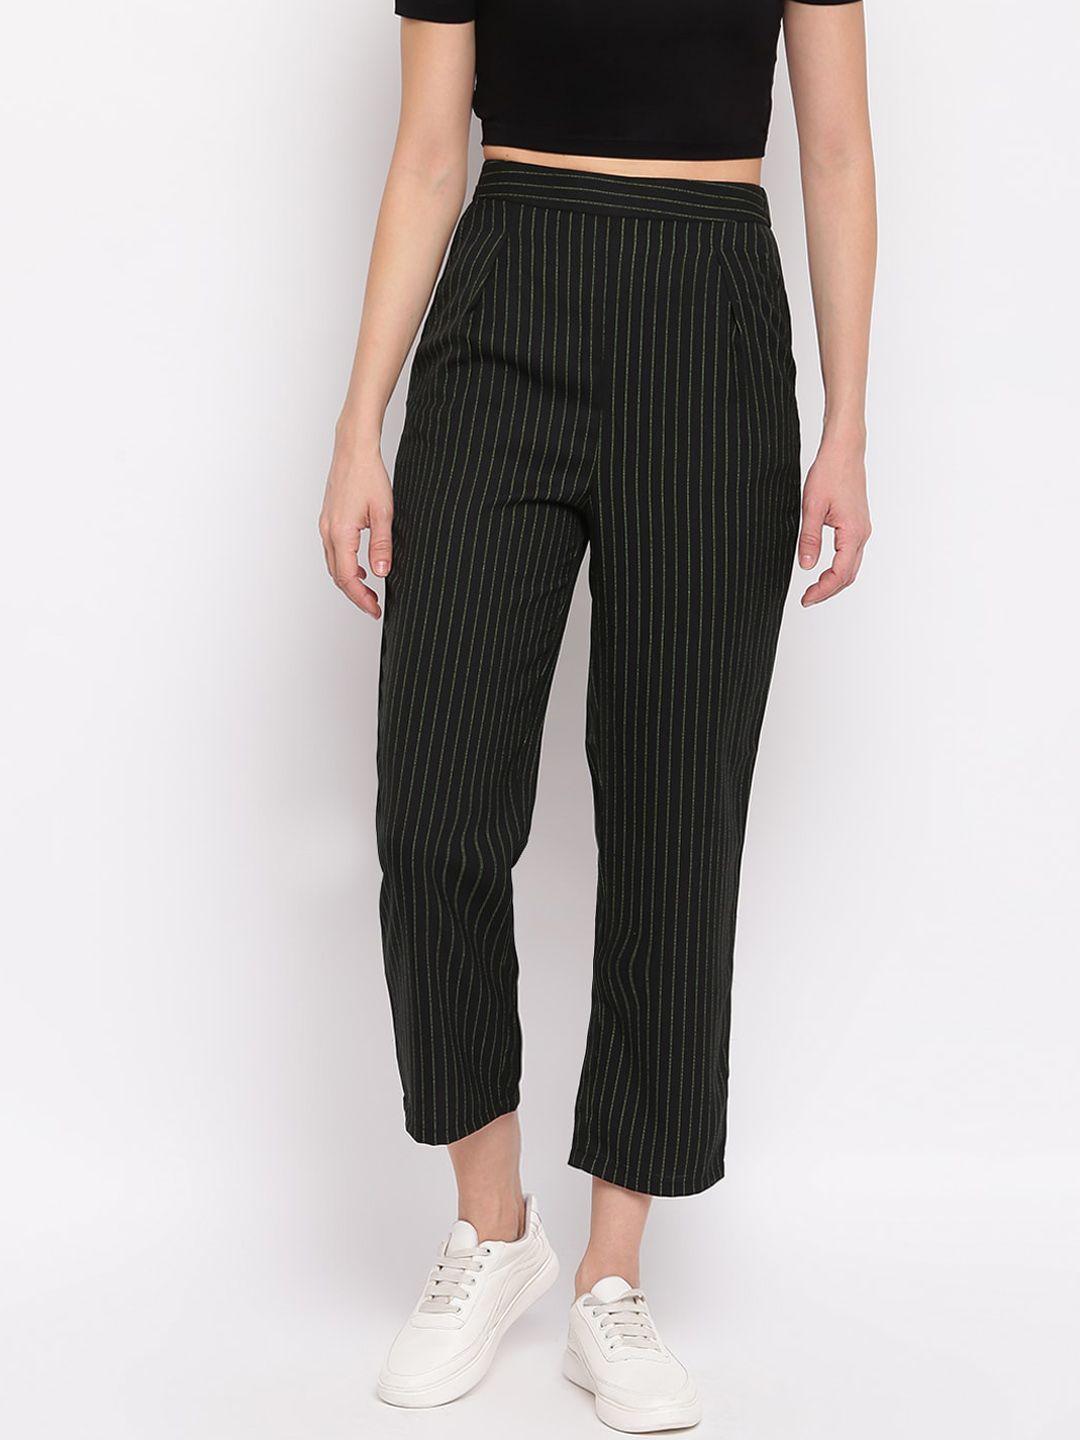 mayra women striped flat front regular fit trousers